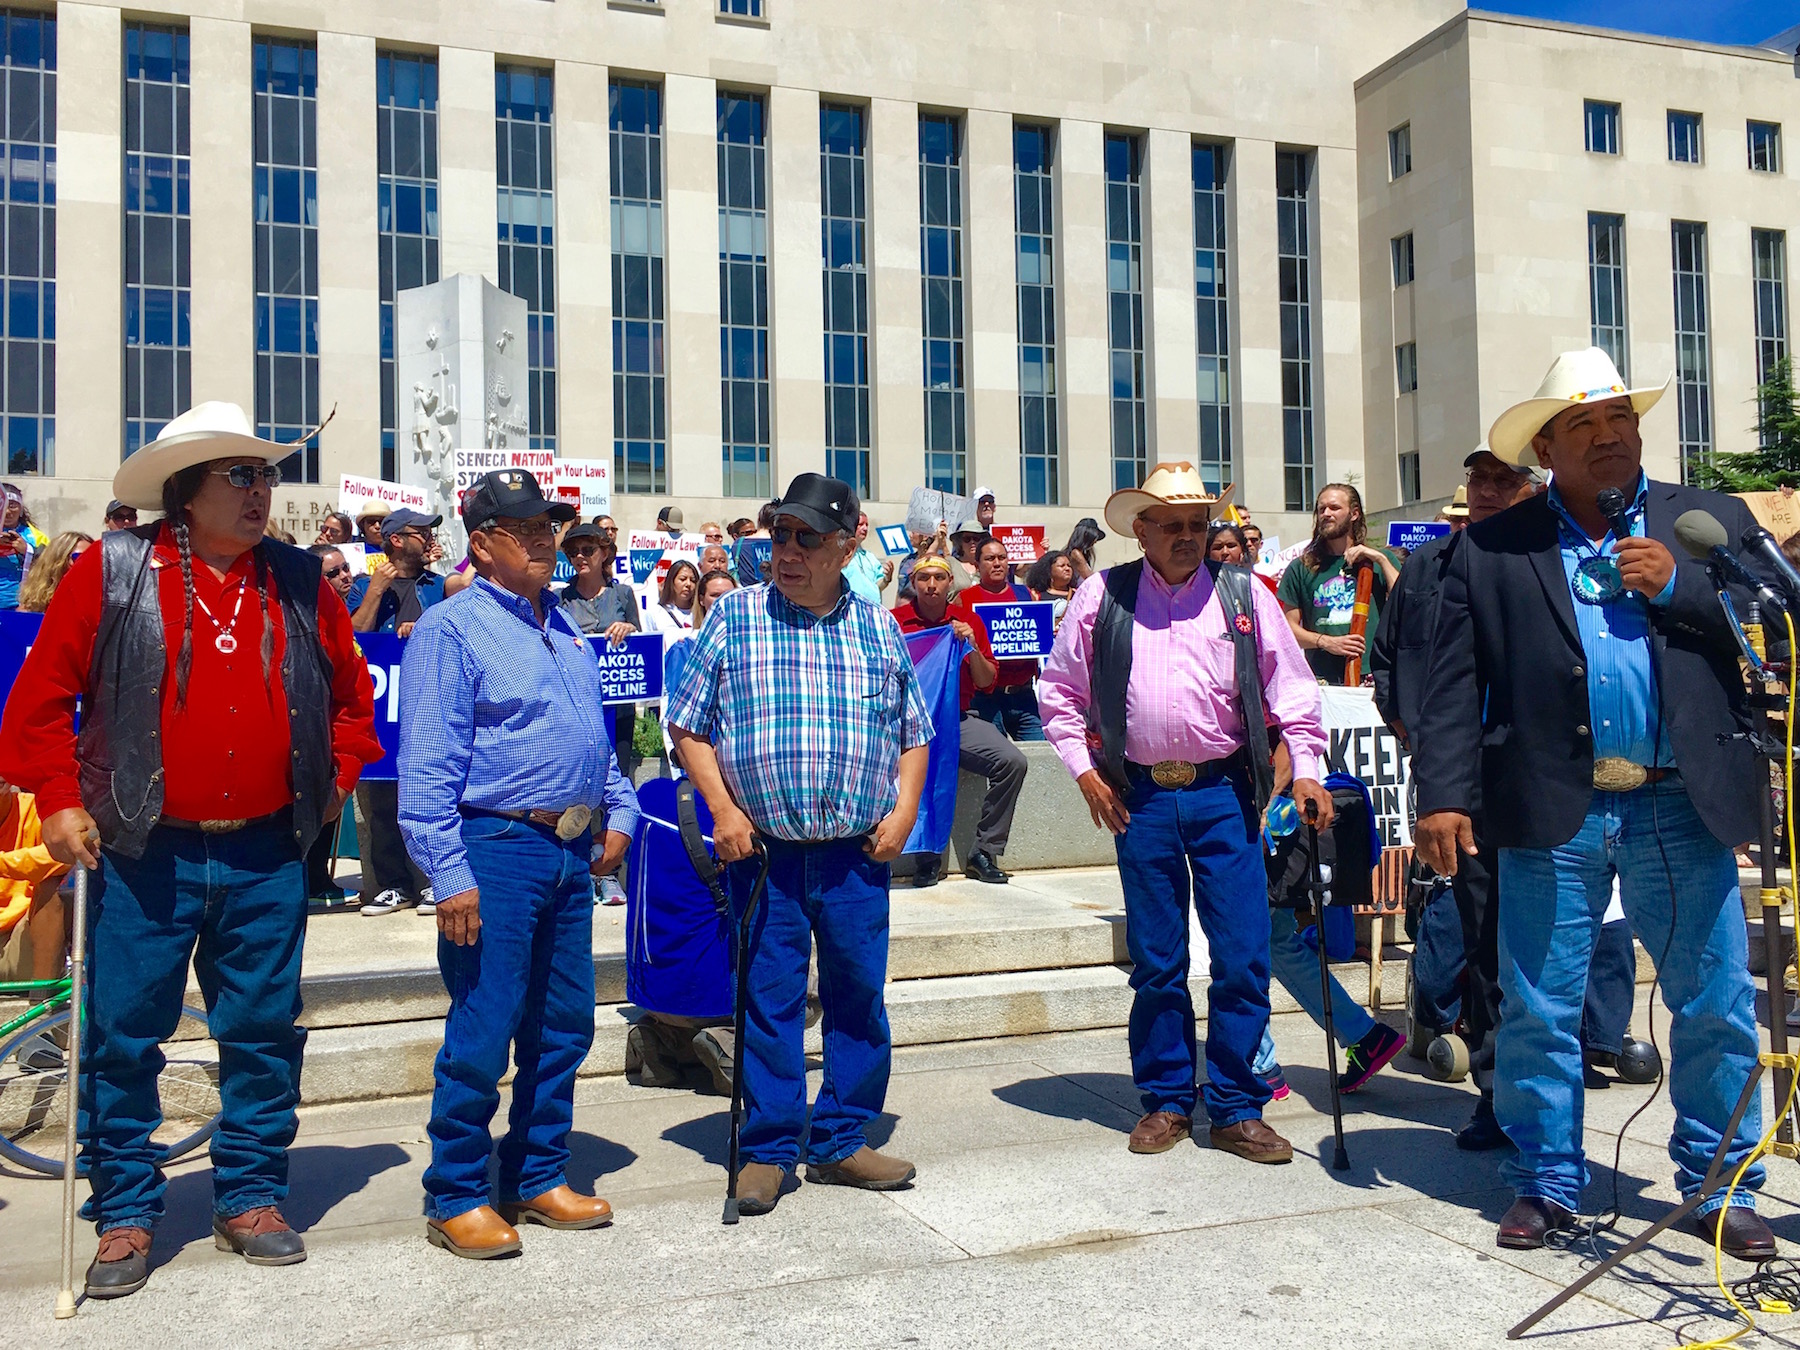 Cheyenne River Sioux Tribe: President Trump can't 'steamroll' over treaties